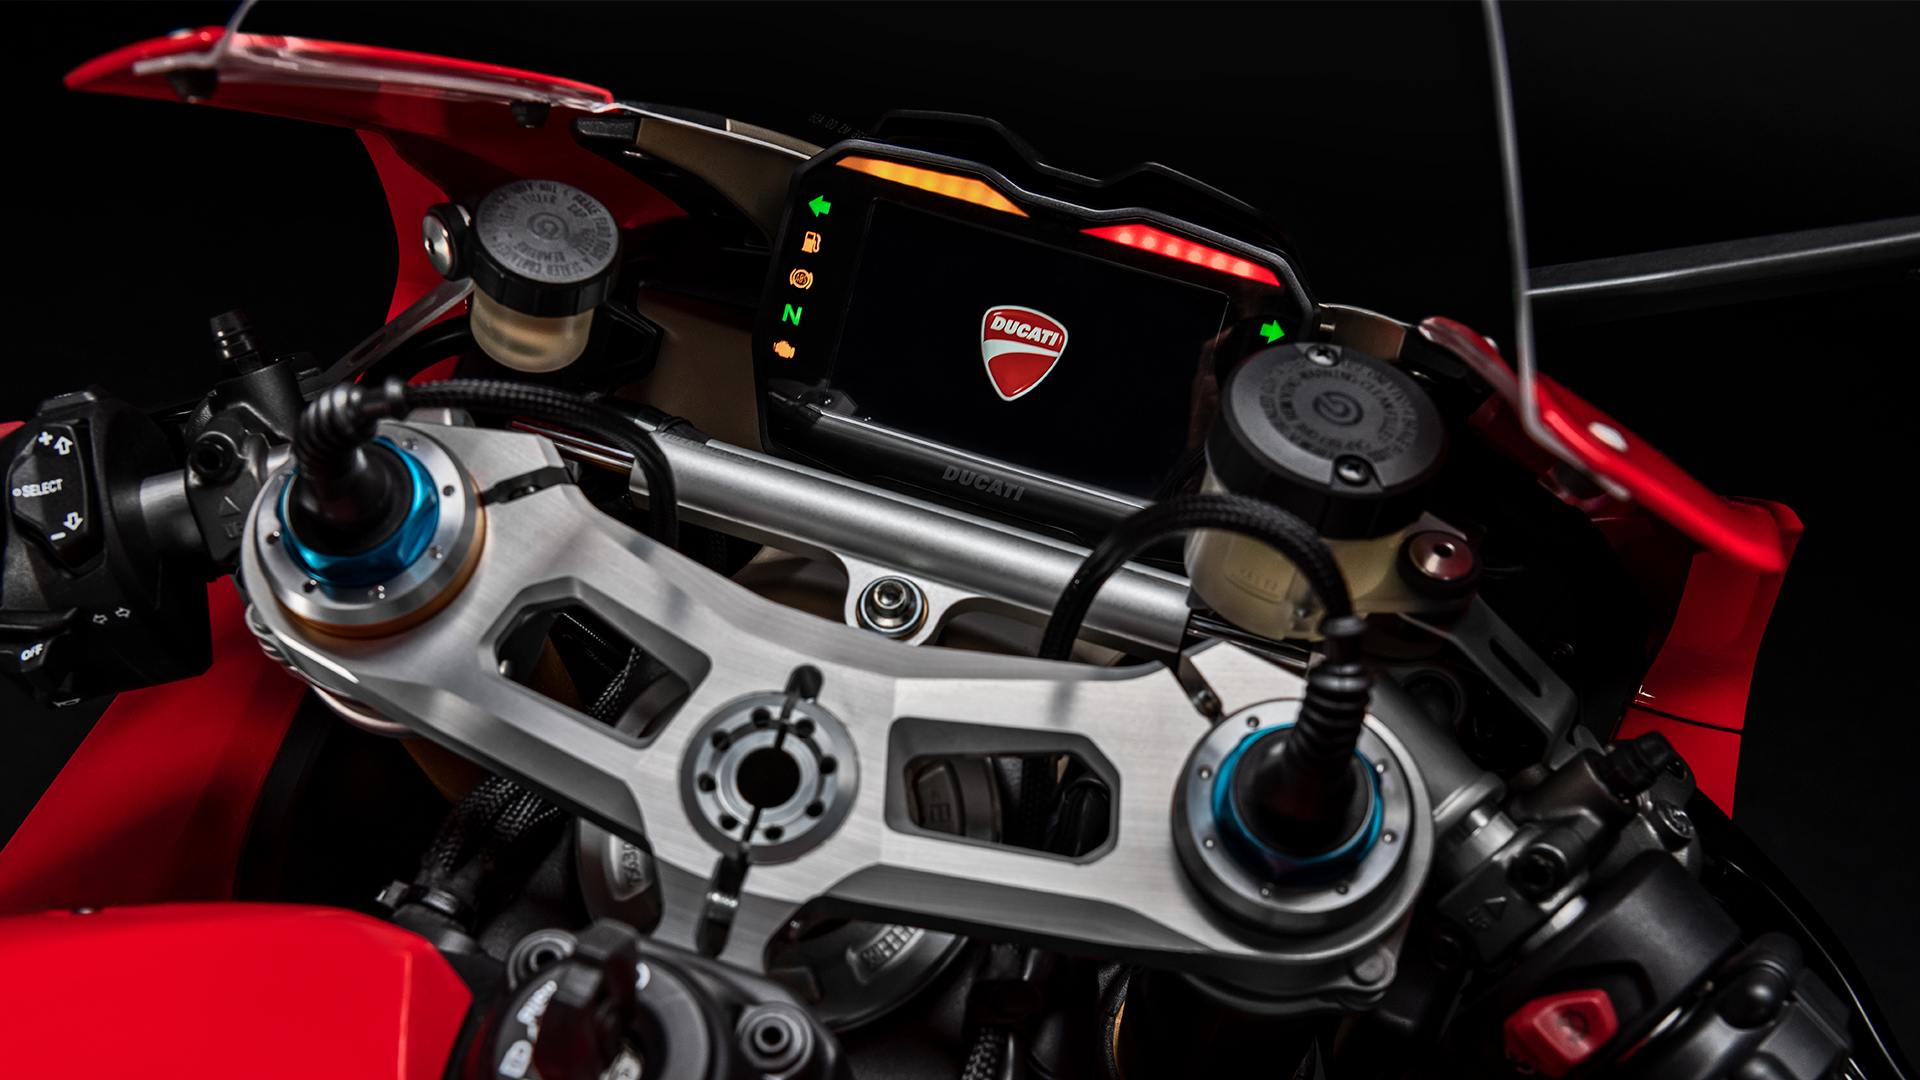 Panigale-V4-Red-Y20-Elettronica-01-Editorial-16-9-1920x1080